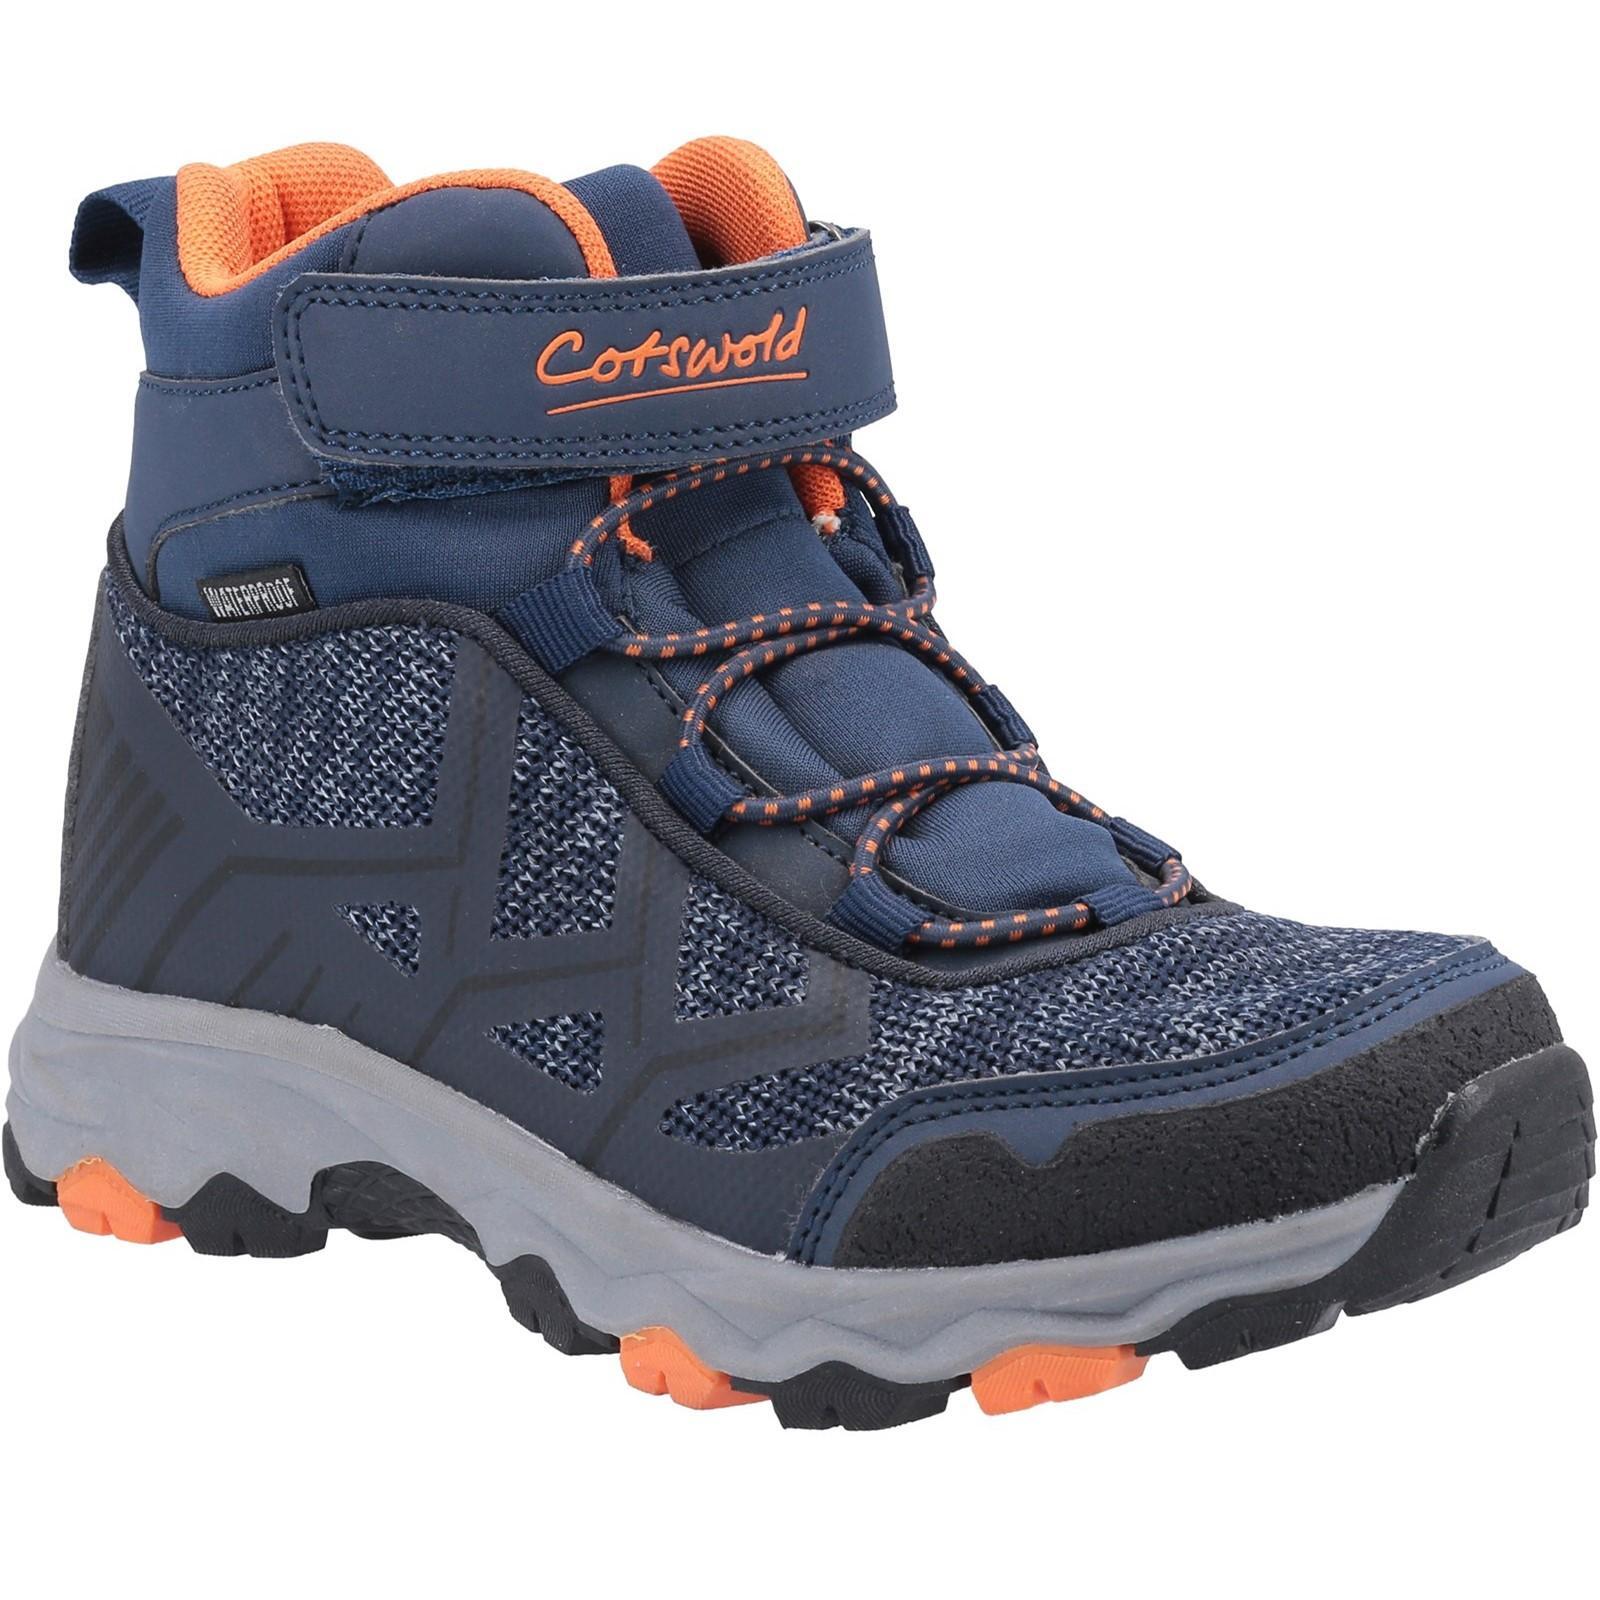 COTSWOLD Childrens/Kids Coaley Hiking Boots (Navy)